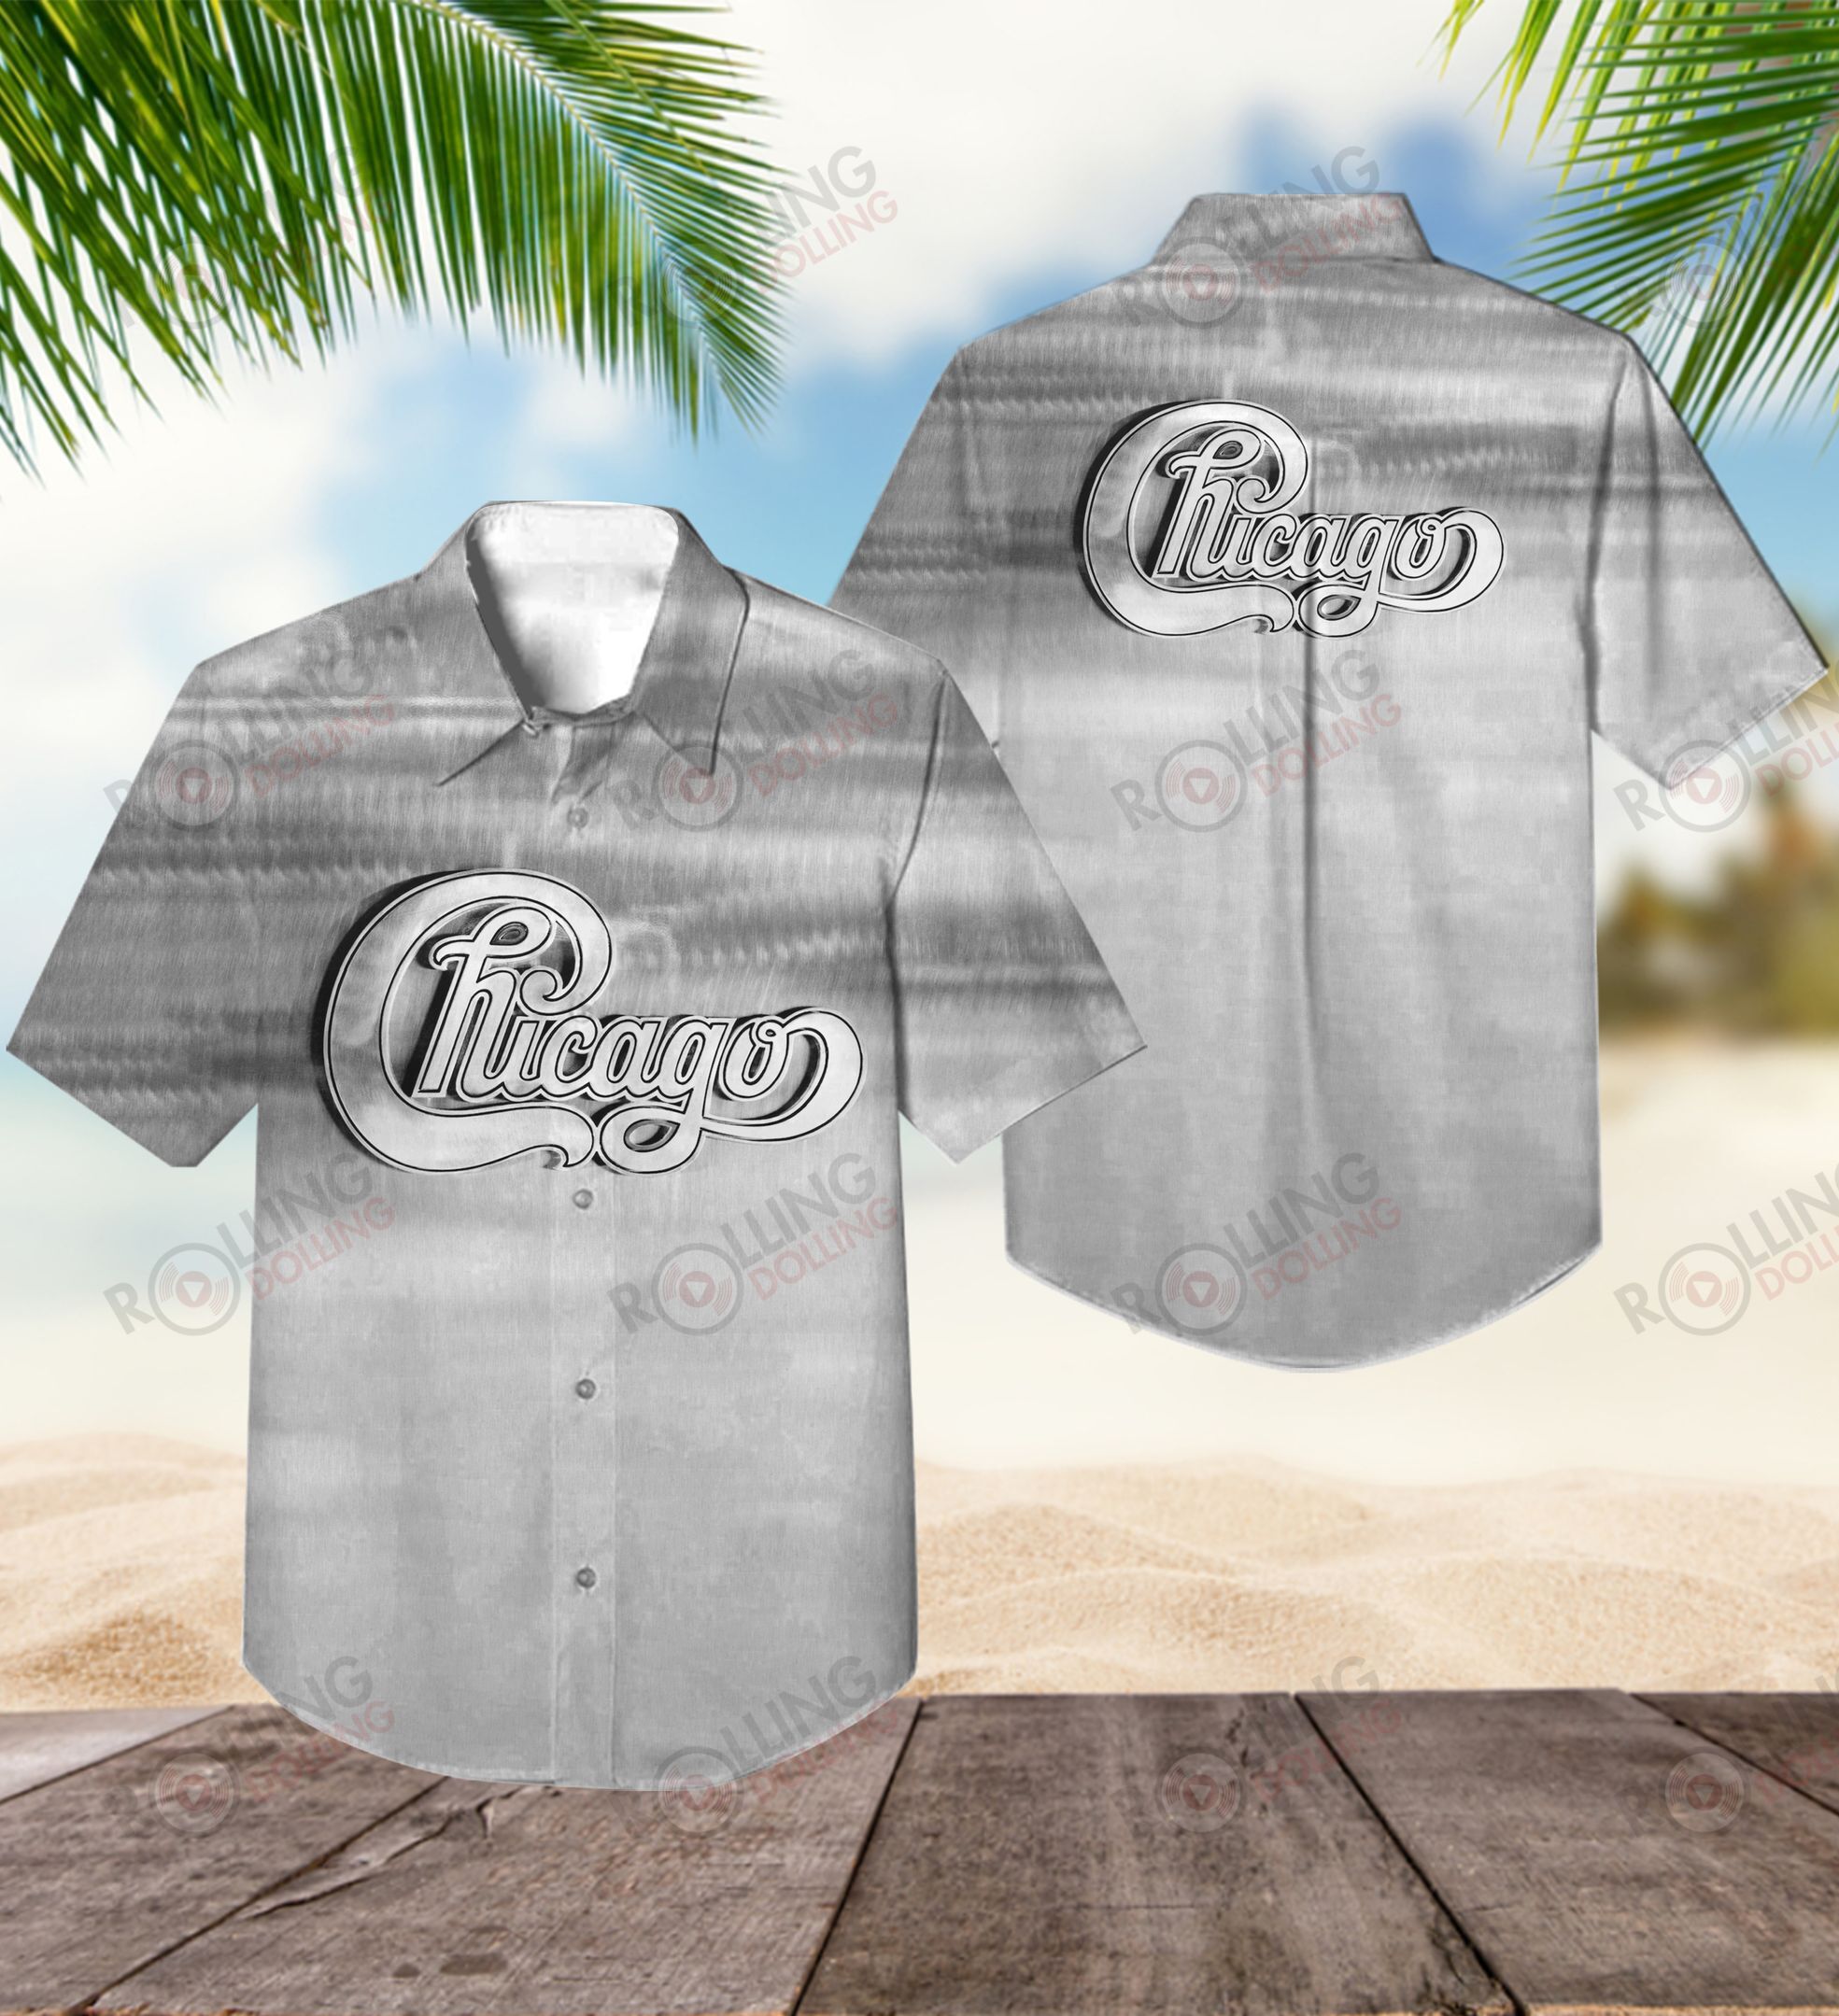 Check out these top 100+ Hawaiian shirt so cool for rock fans 311